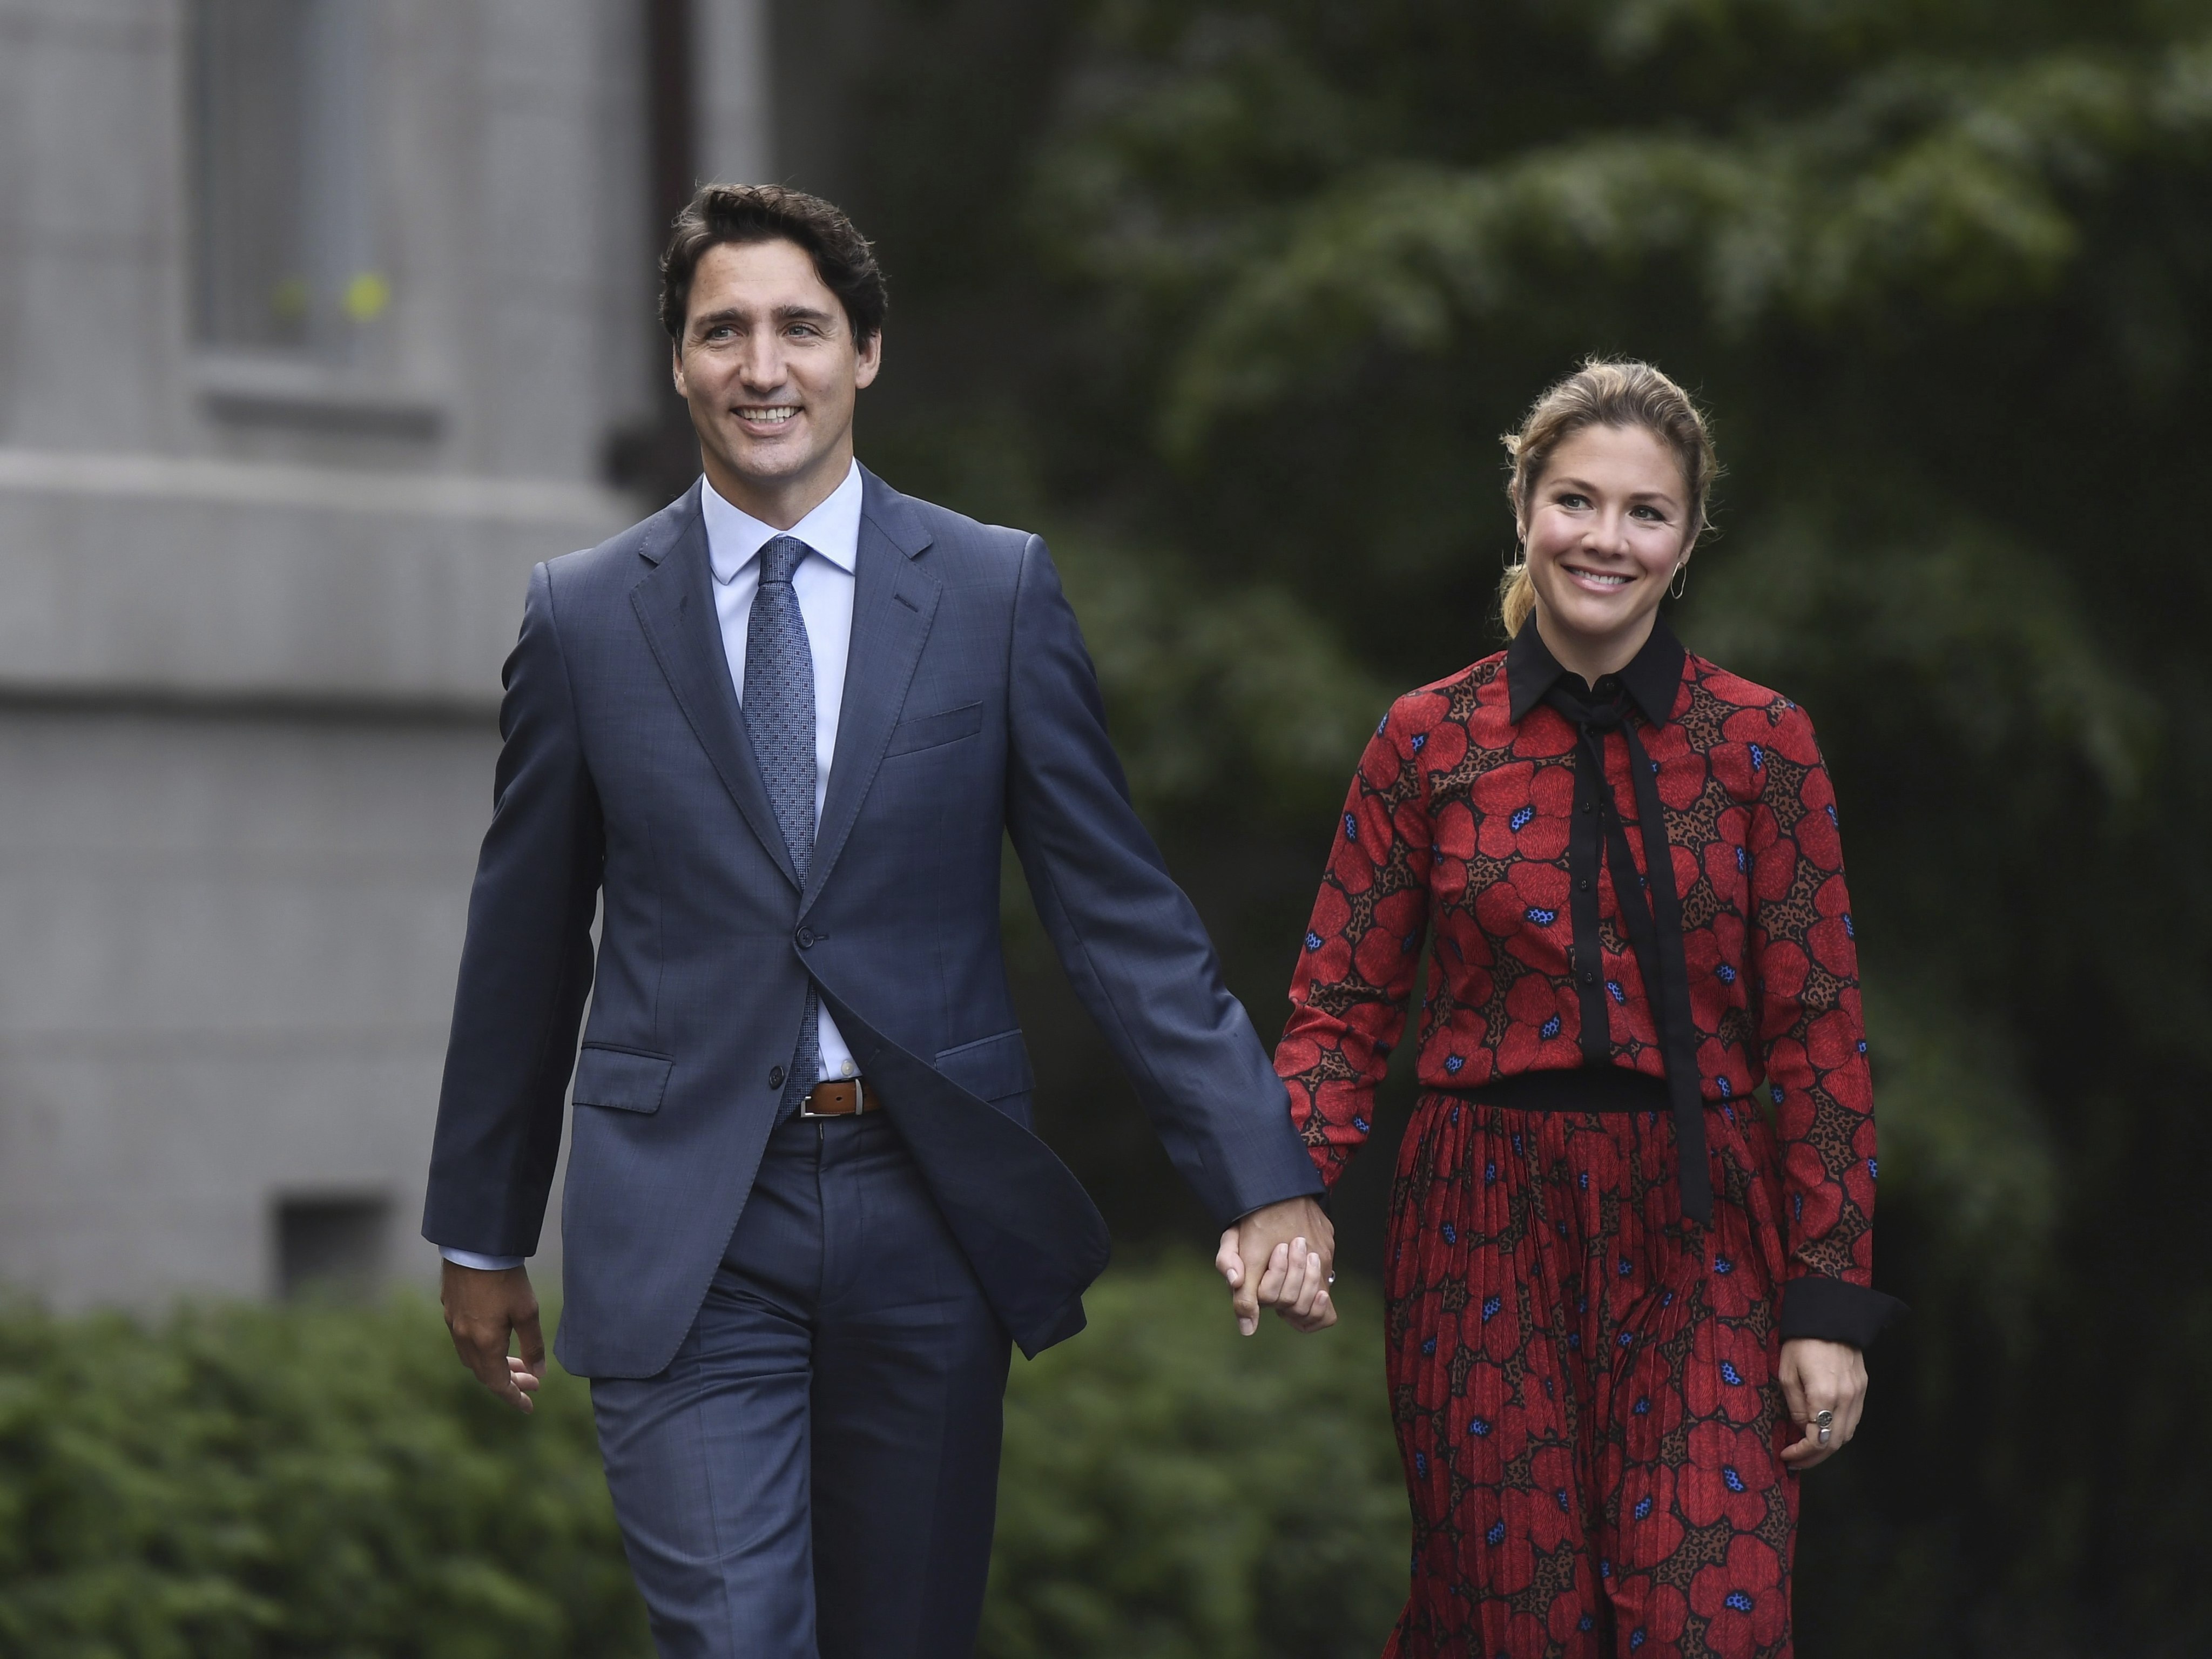 Canada’s Prime Minister Justin Trudeau and his wife, Sophie Gregoire Trudeau, arrive at Rideau Hall in Ottawa, Ontario in 2019. The Canadian prime minister and his wife announced Wednesday, Aug. 2, 2023, that they are separating after 18 years of marriage. Photo: AP